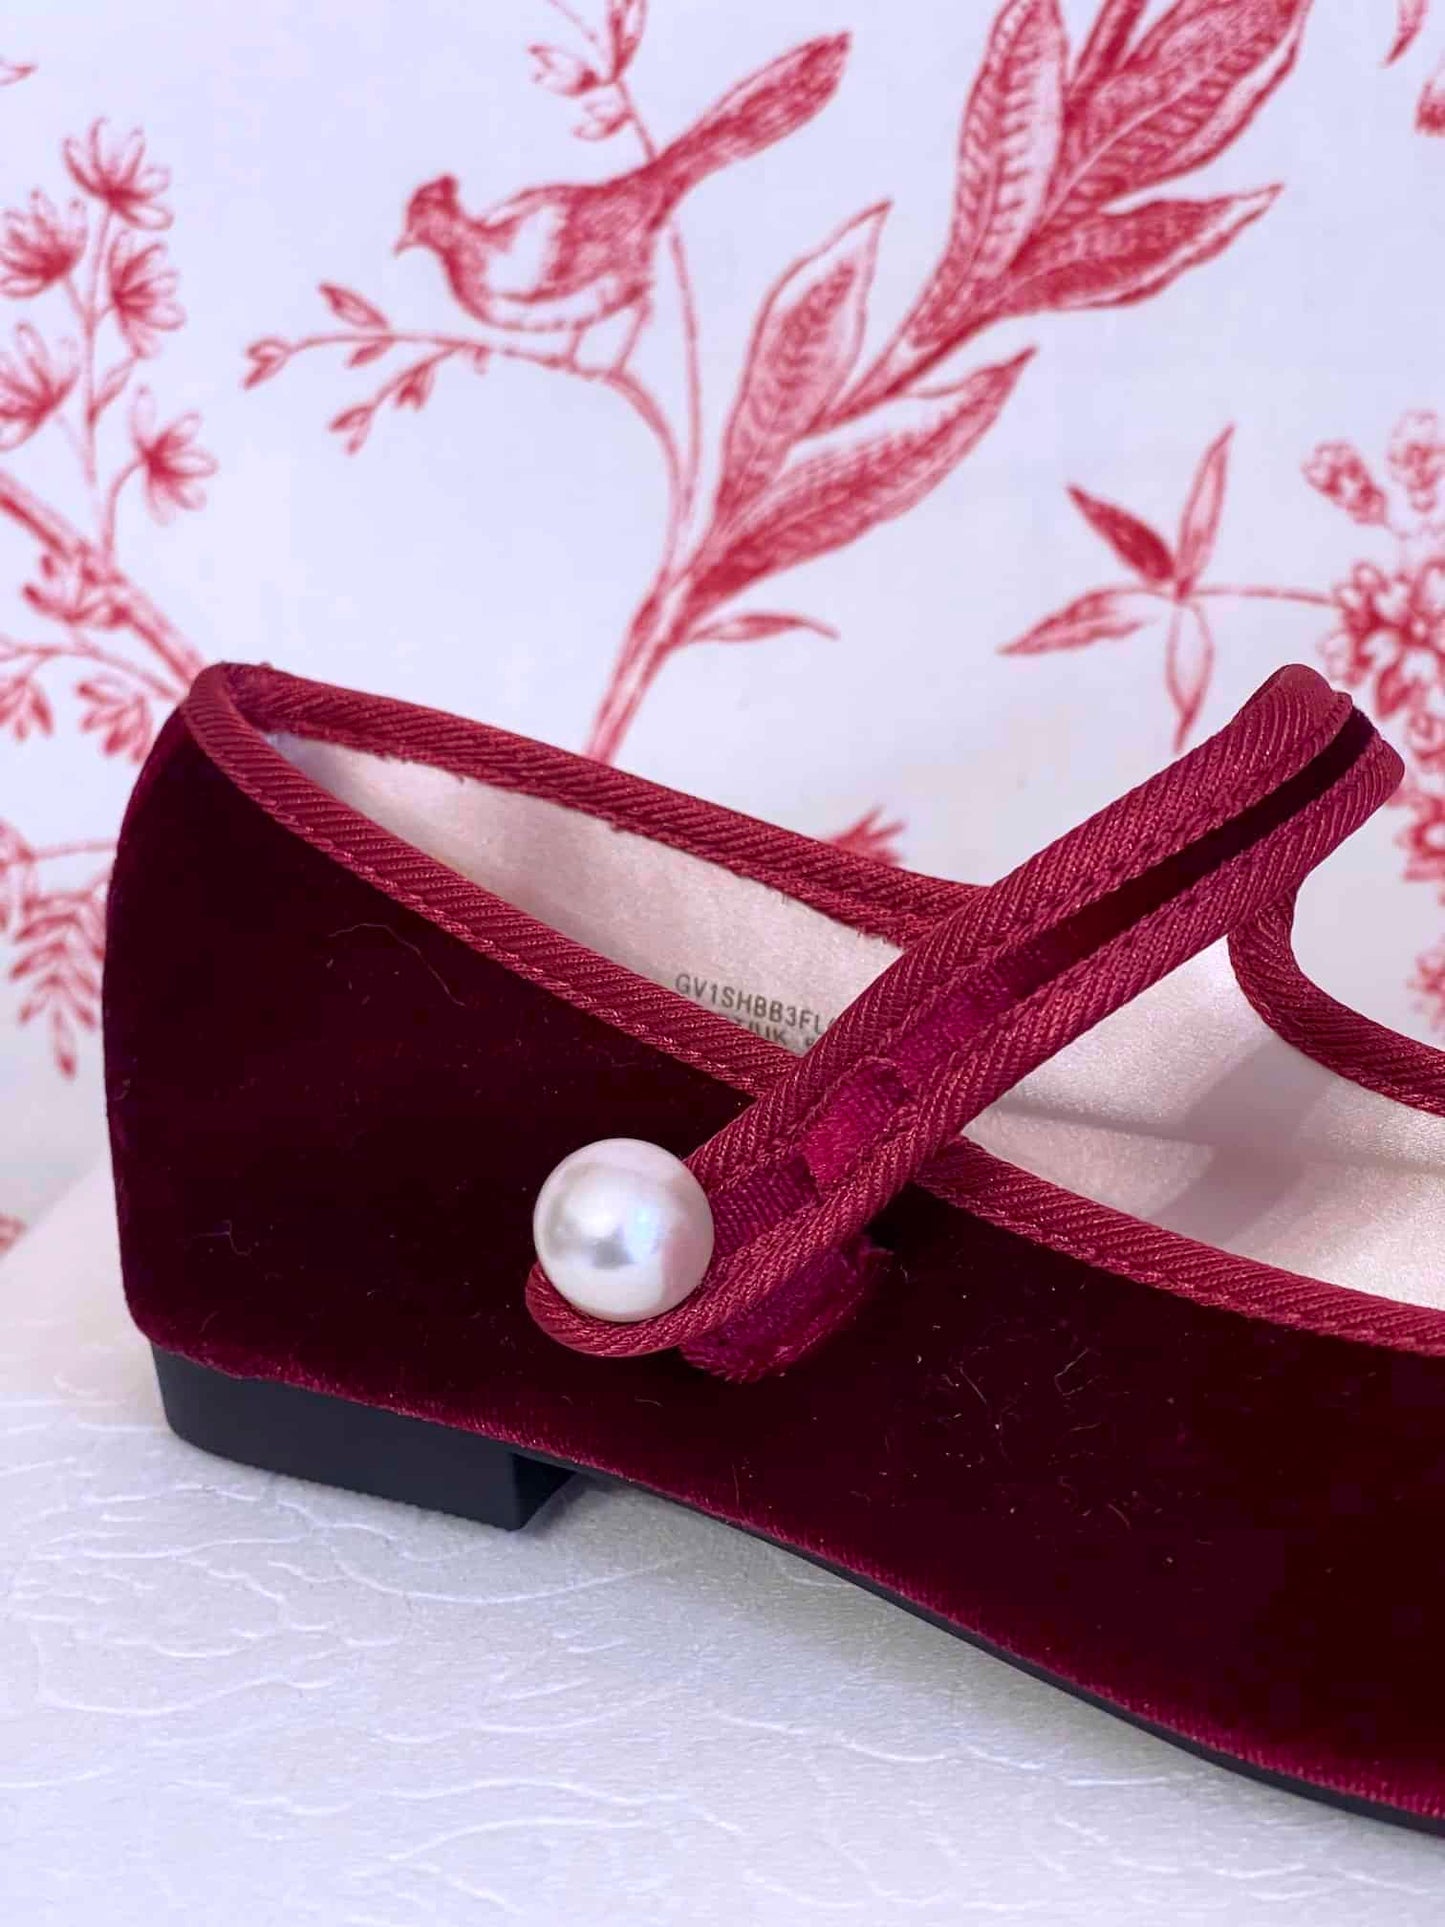 A pair of Historically Inspired Renaissance, Tudor, Baroque era Velvet Slipper Flats in Burgundy with pearl decorative button.